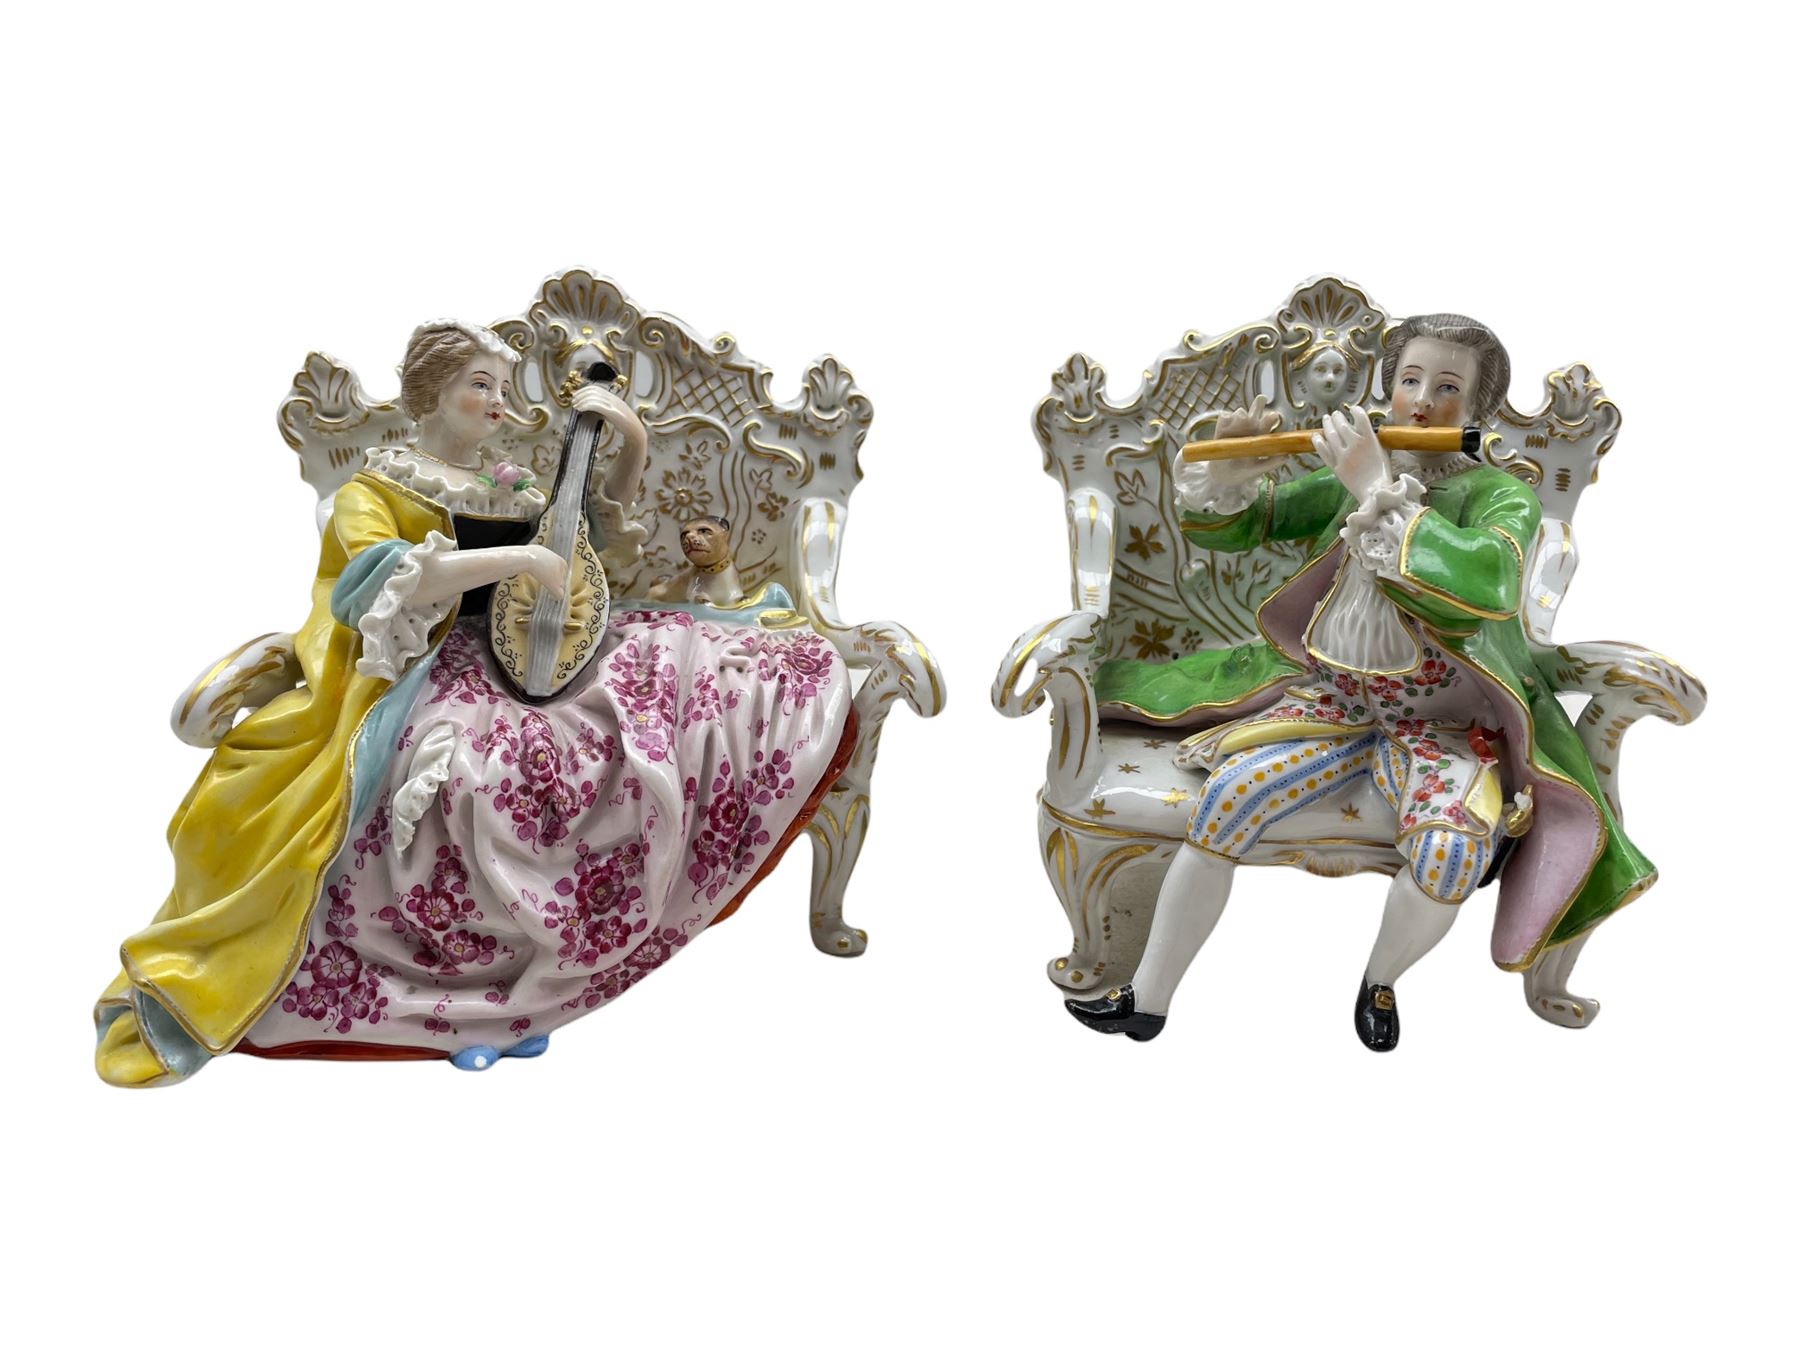 Pair of Hochst porcelain figures modelled as a male and female figure seated on an ornate sofa playi